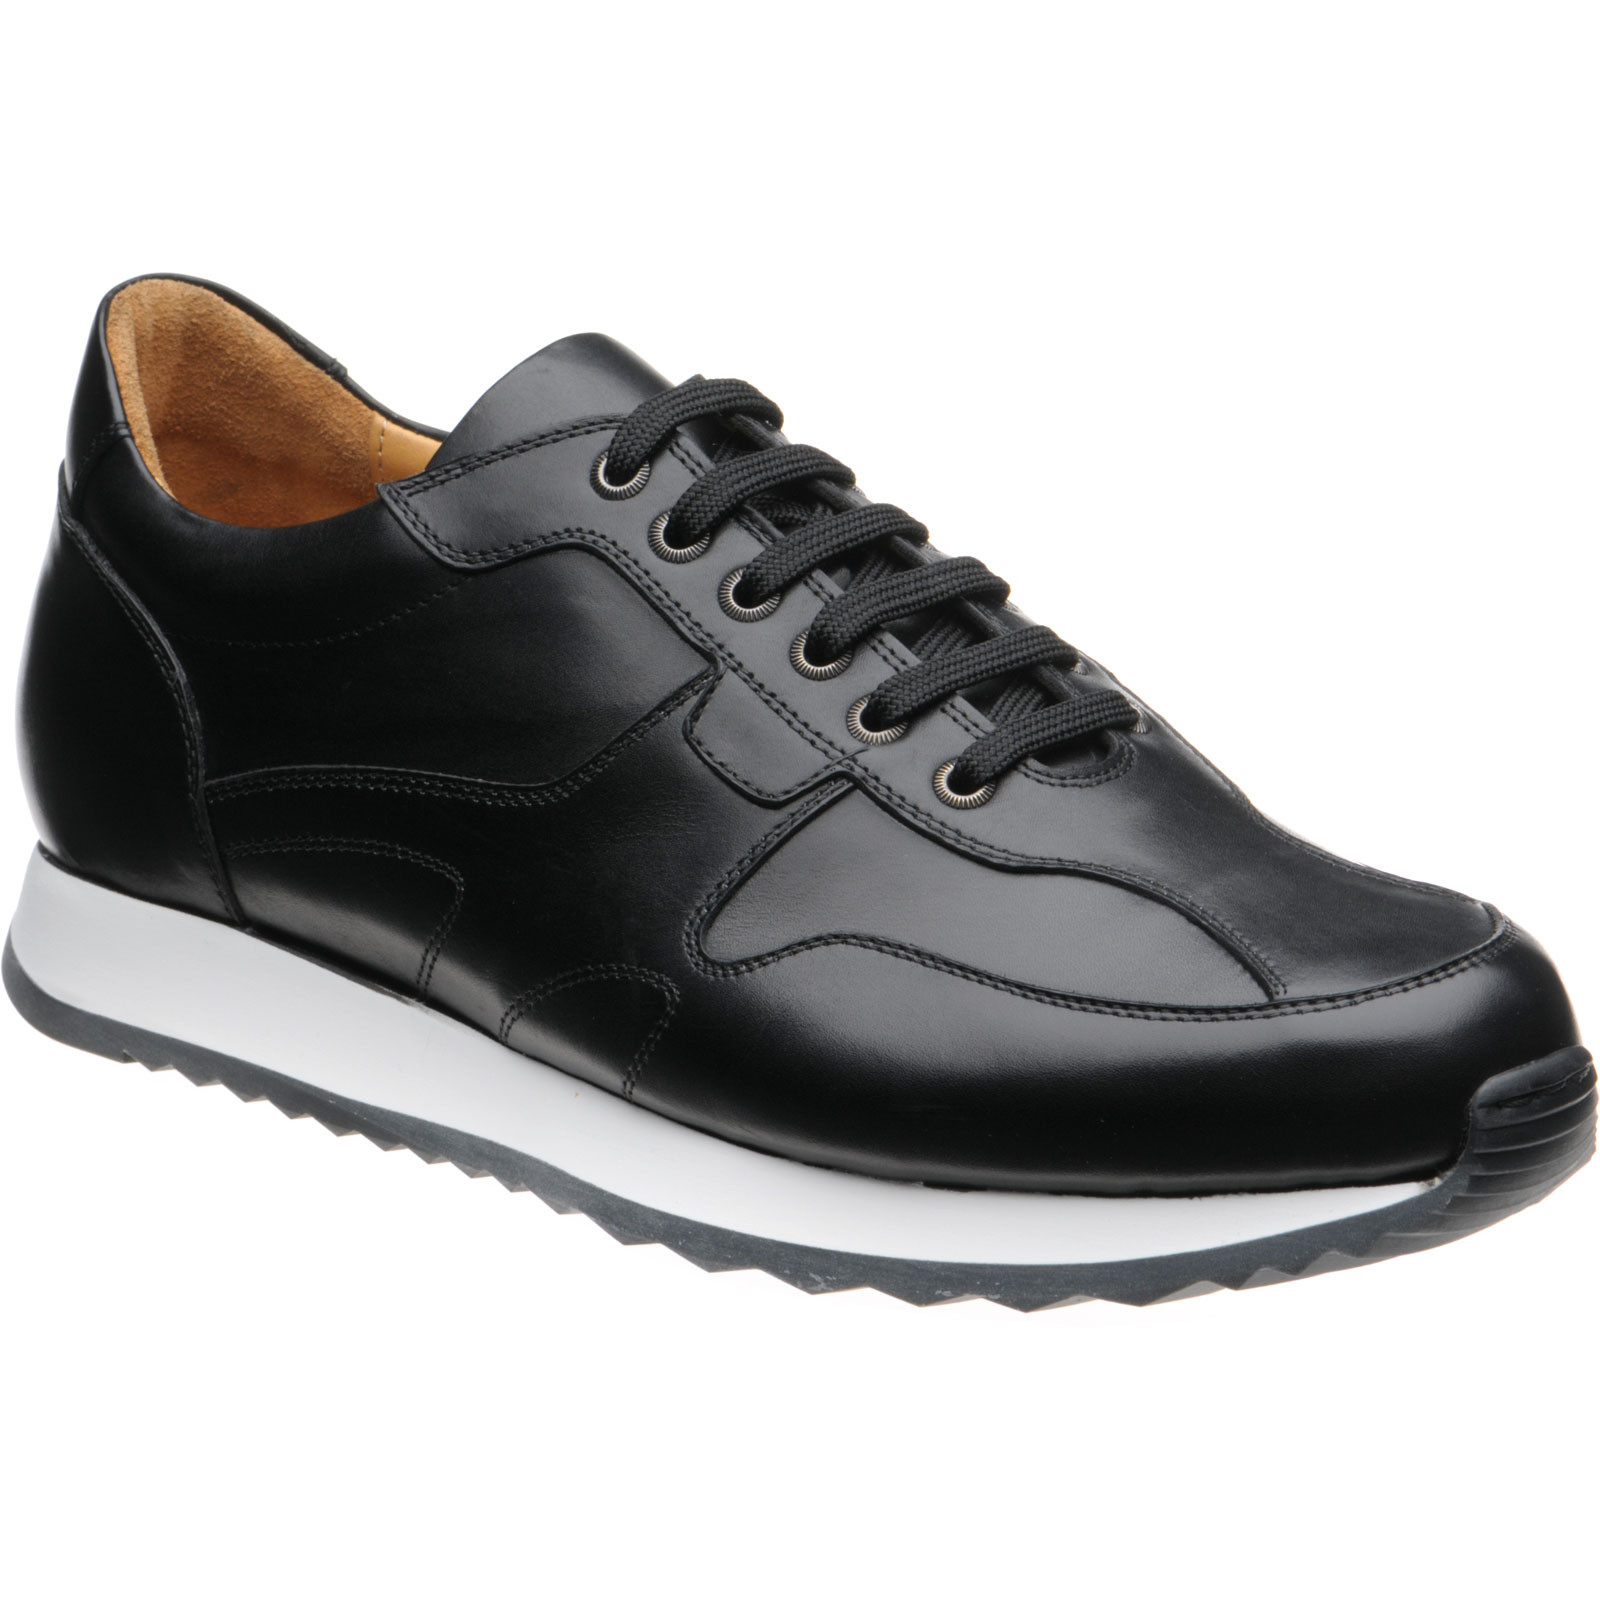 Herring shoes | Herring Trainers | Goodwood rubber-soled in Black Calf ...